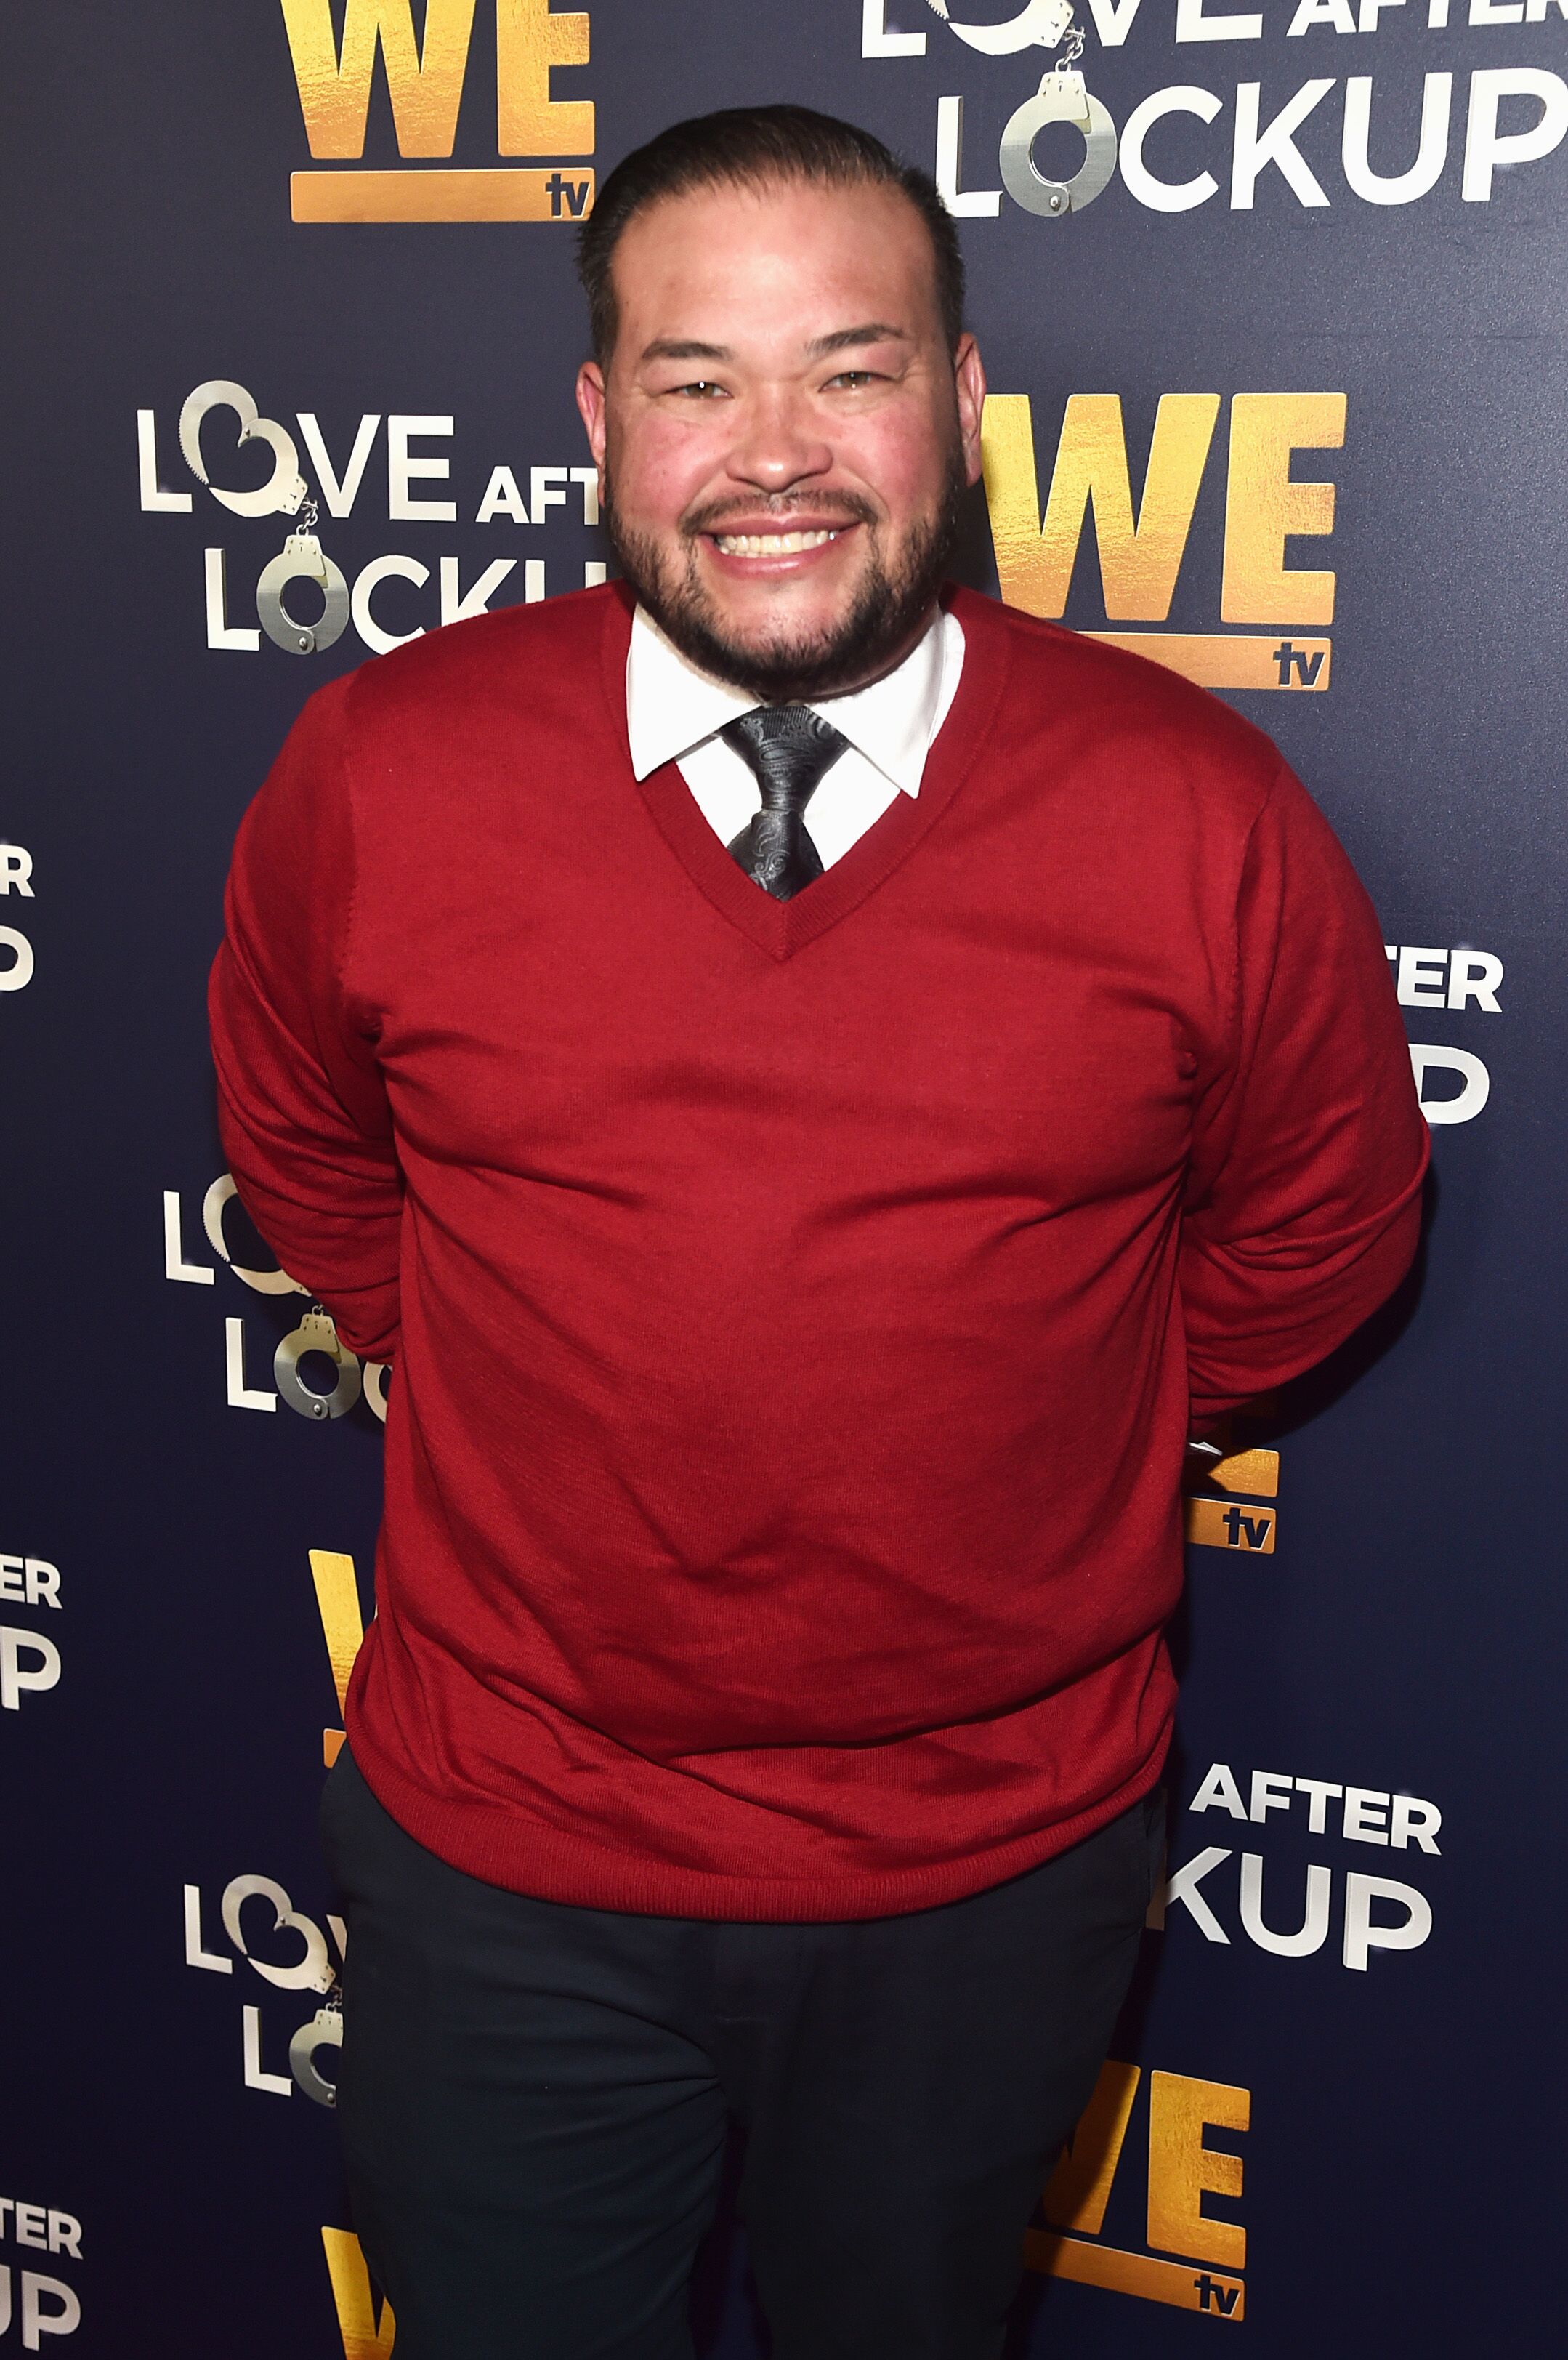 Jon Gosselin at WE tv on December 11, 2018, in Beverly Hills, California Photo Alberto E. Rodriguez Getty Images